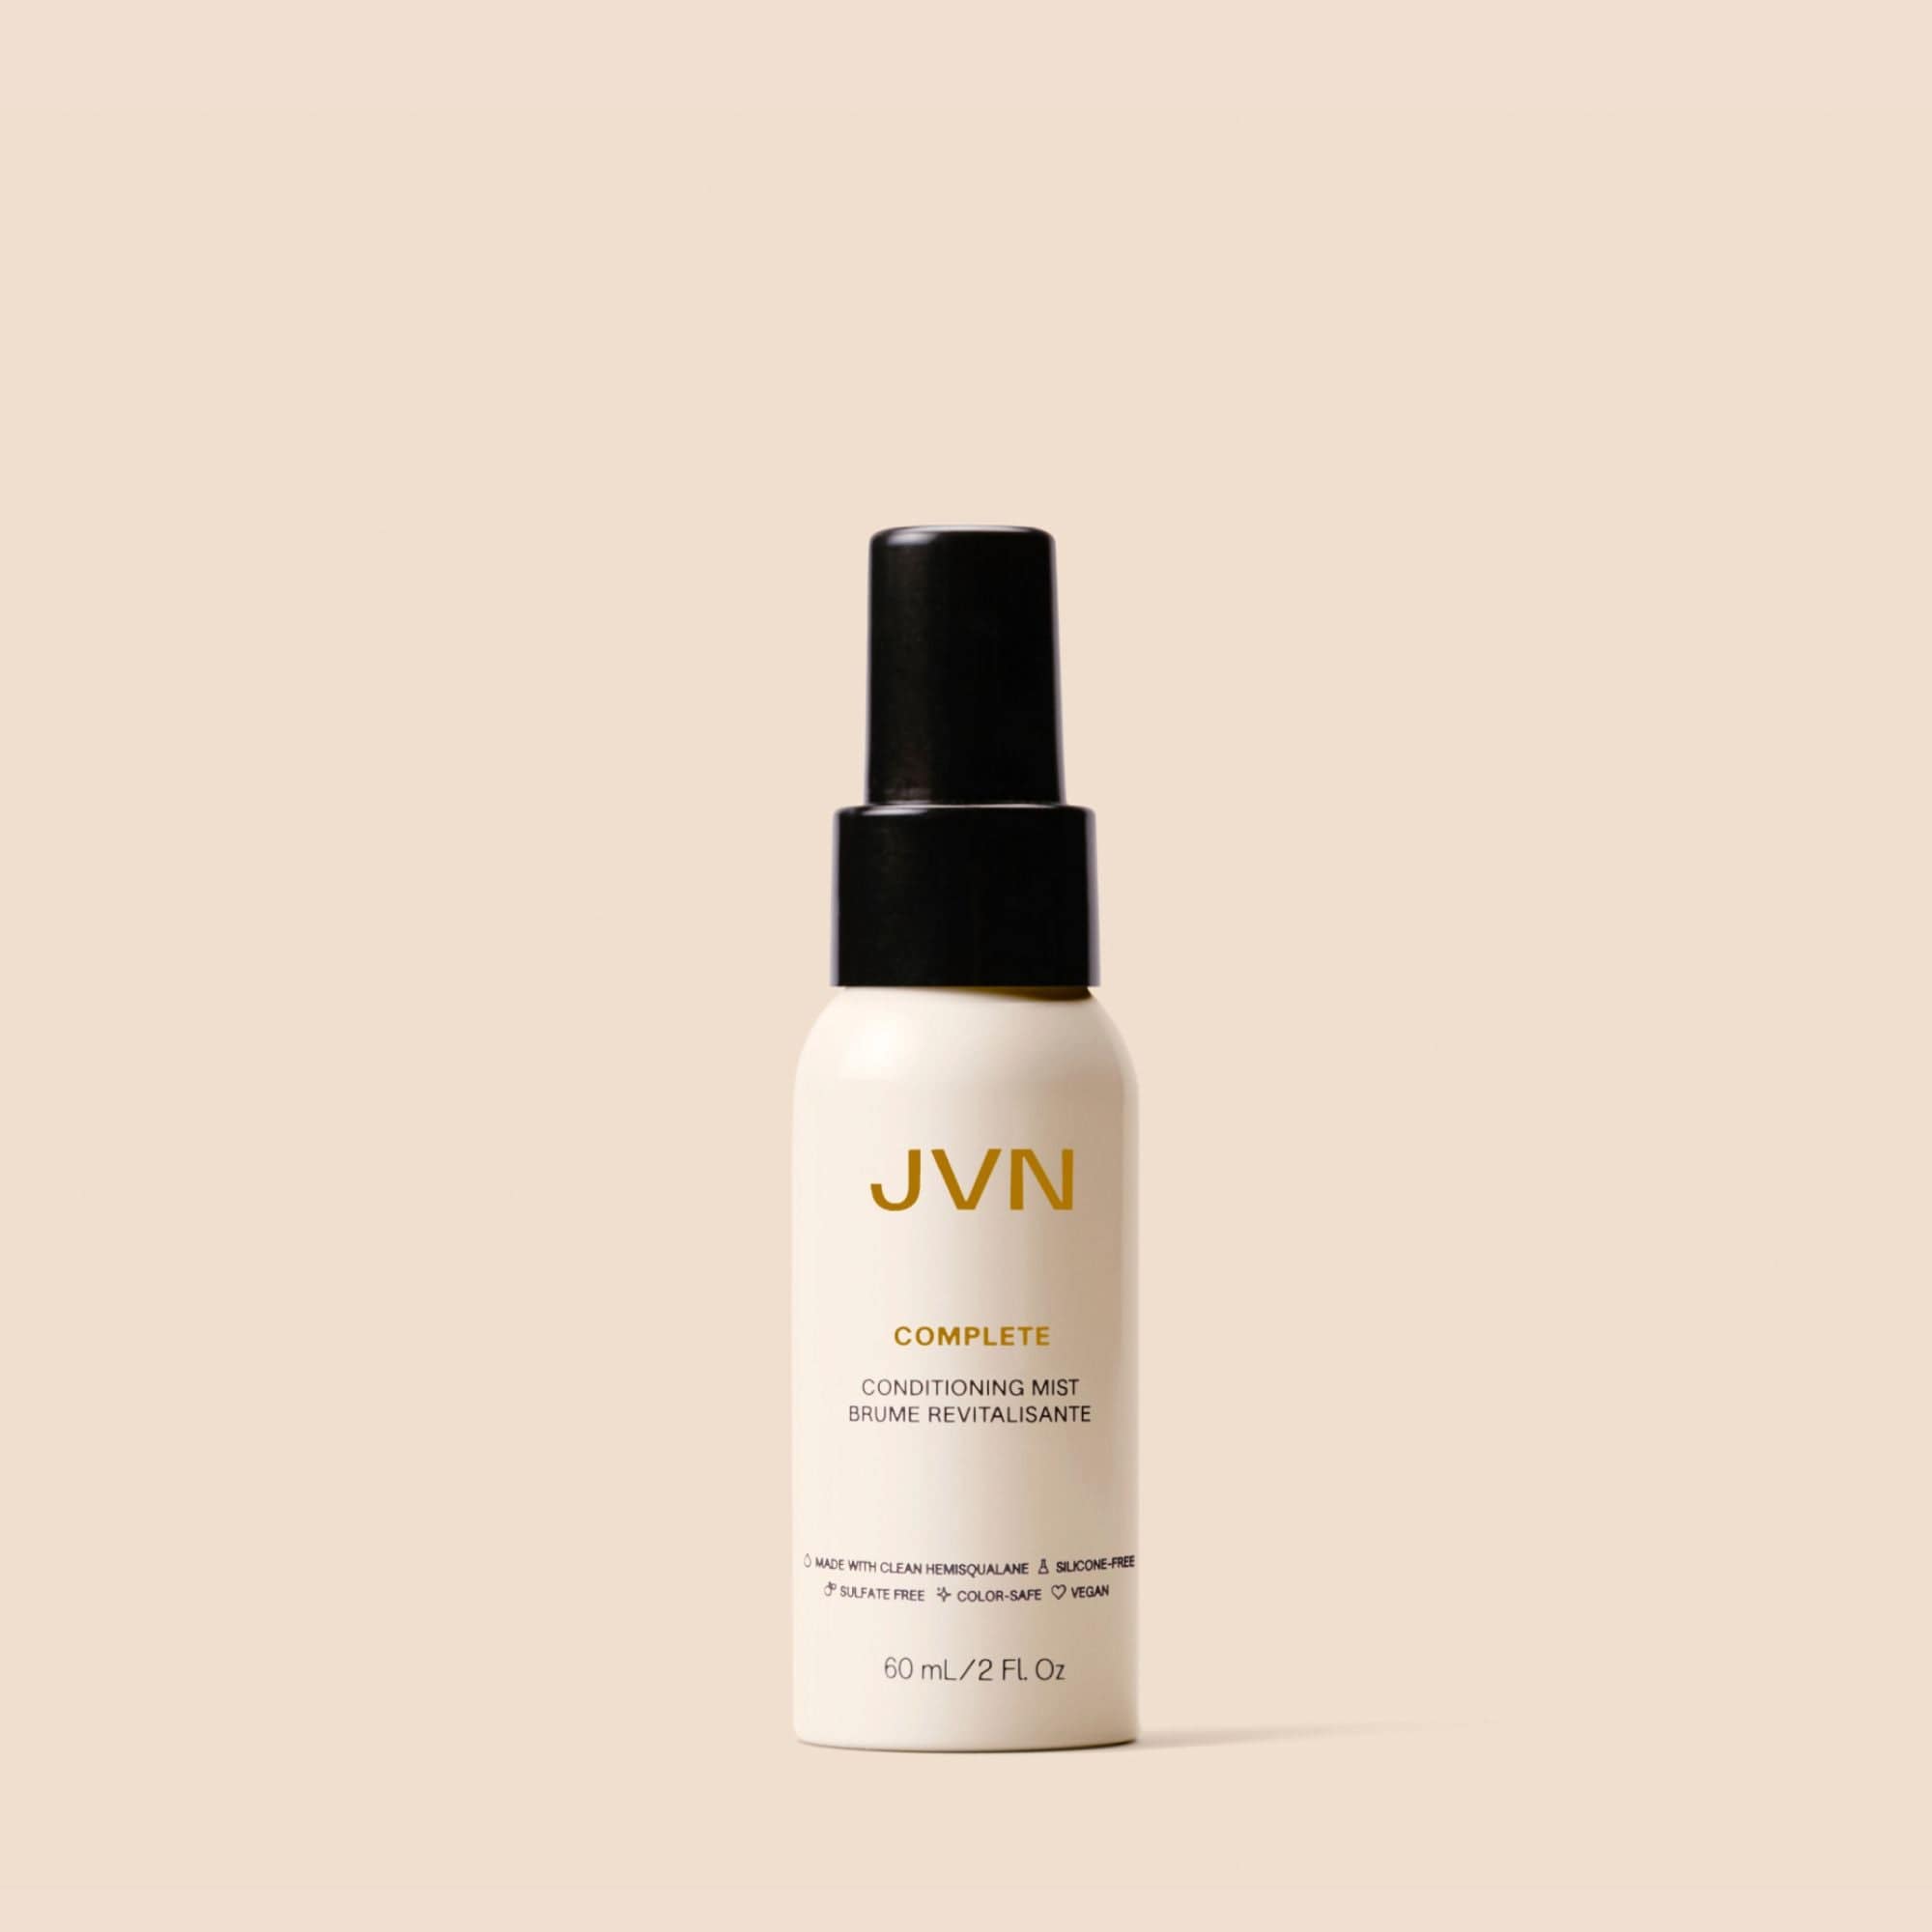 JVN Styler Complete Conditioning Mist Travel JVN Travel Complete Conditioning Mist | Detangling Leave In Conditioner | JVN sulfate-free silicone-free sustainable